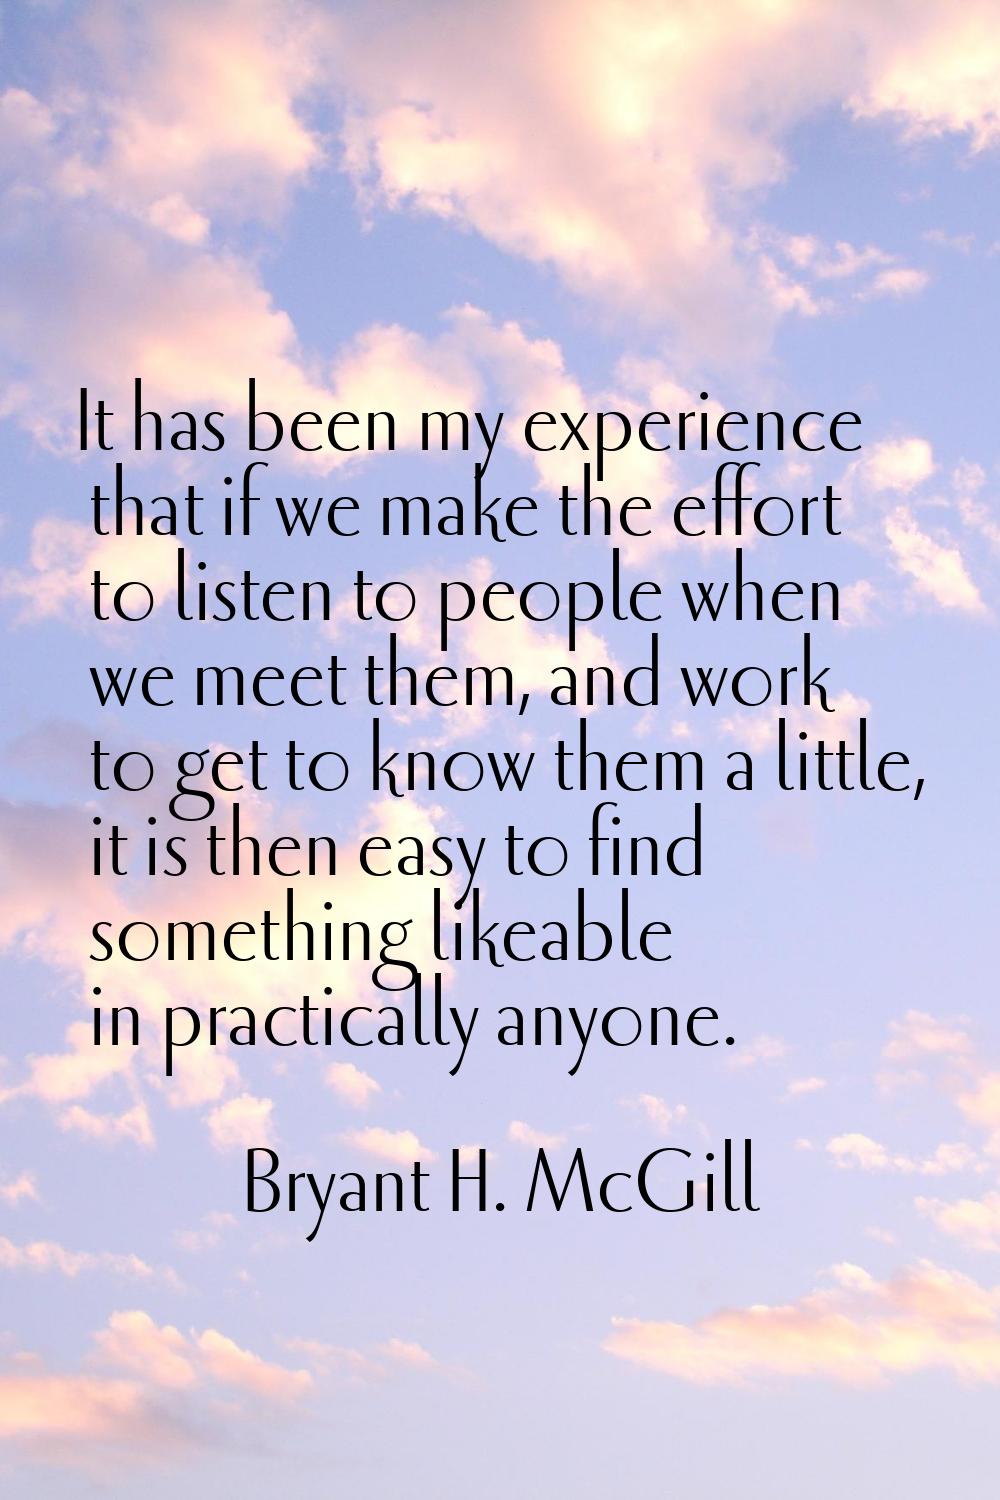 It has been my experience that if we make the effort to listen to people when we meet them, and wor